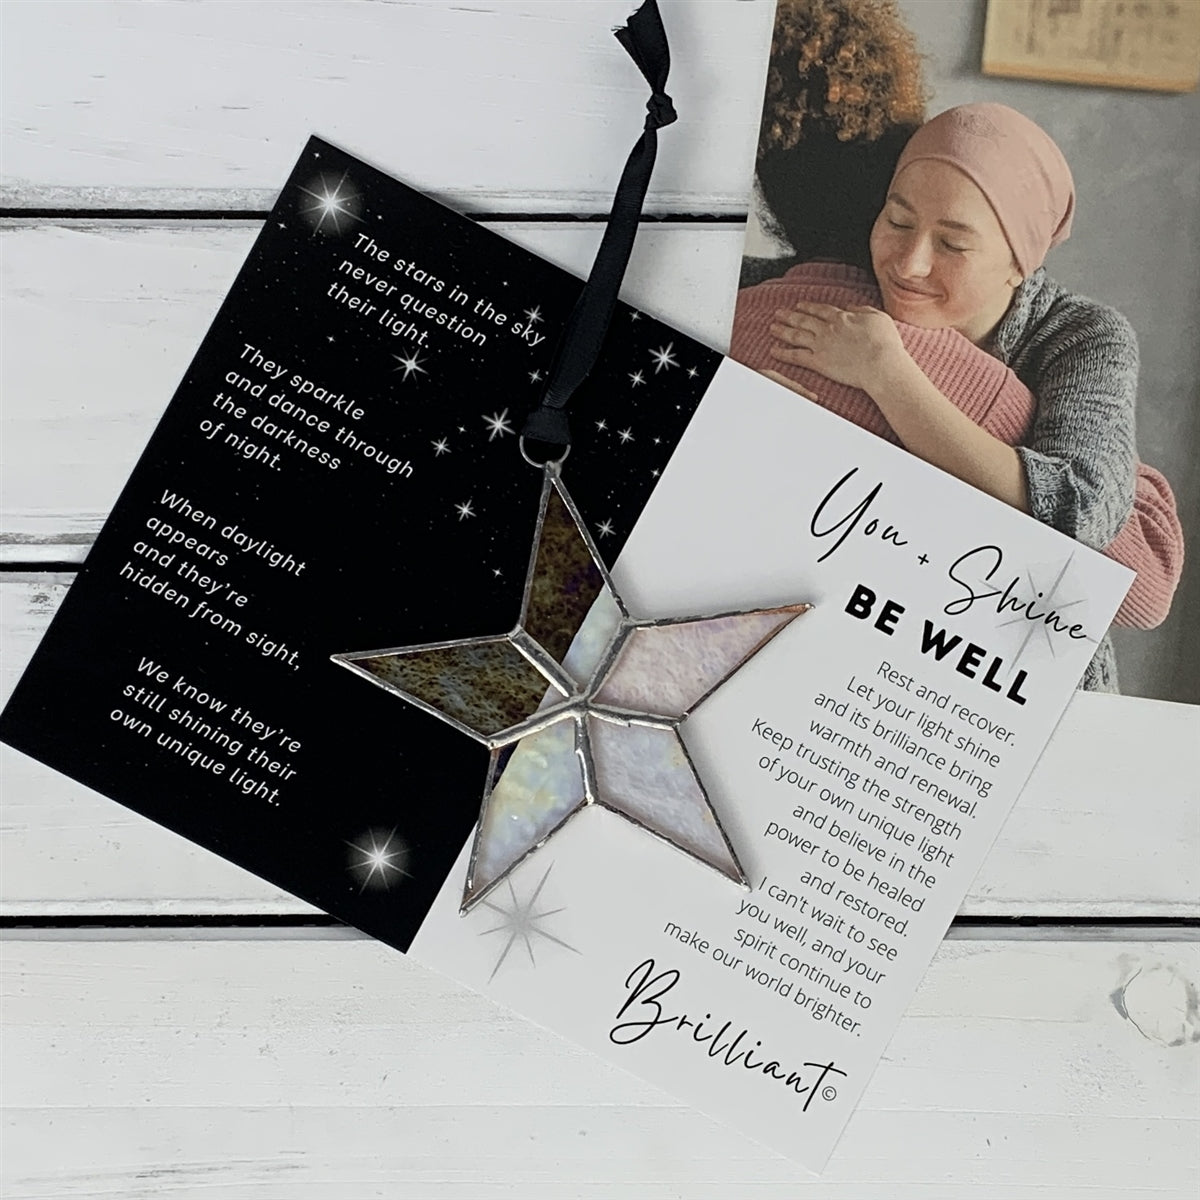 Be Well star and artwork with the "You + Shine" poem on the left side and the "Be Well" sentiment on the right side.